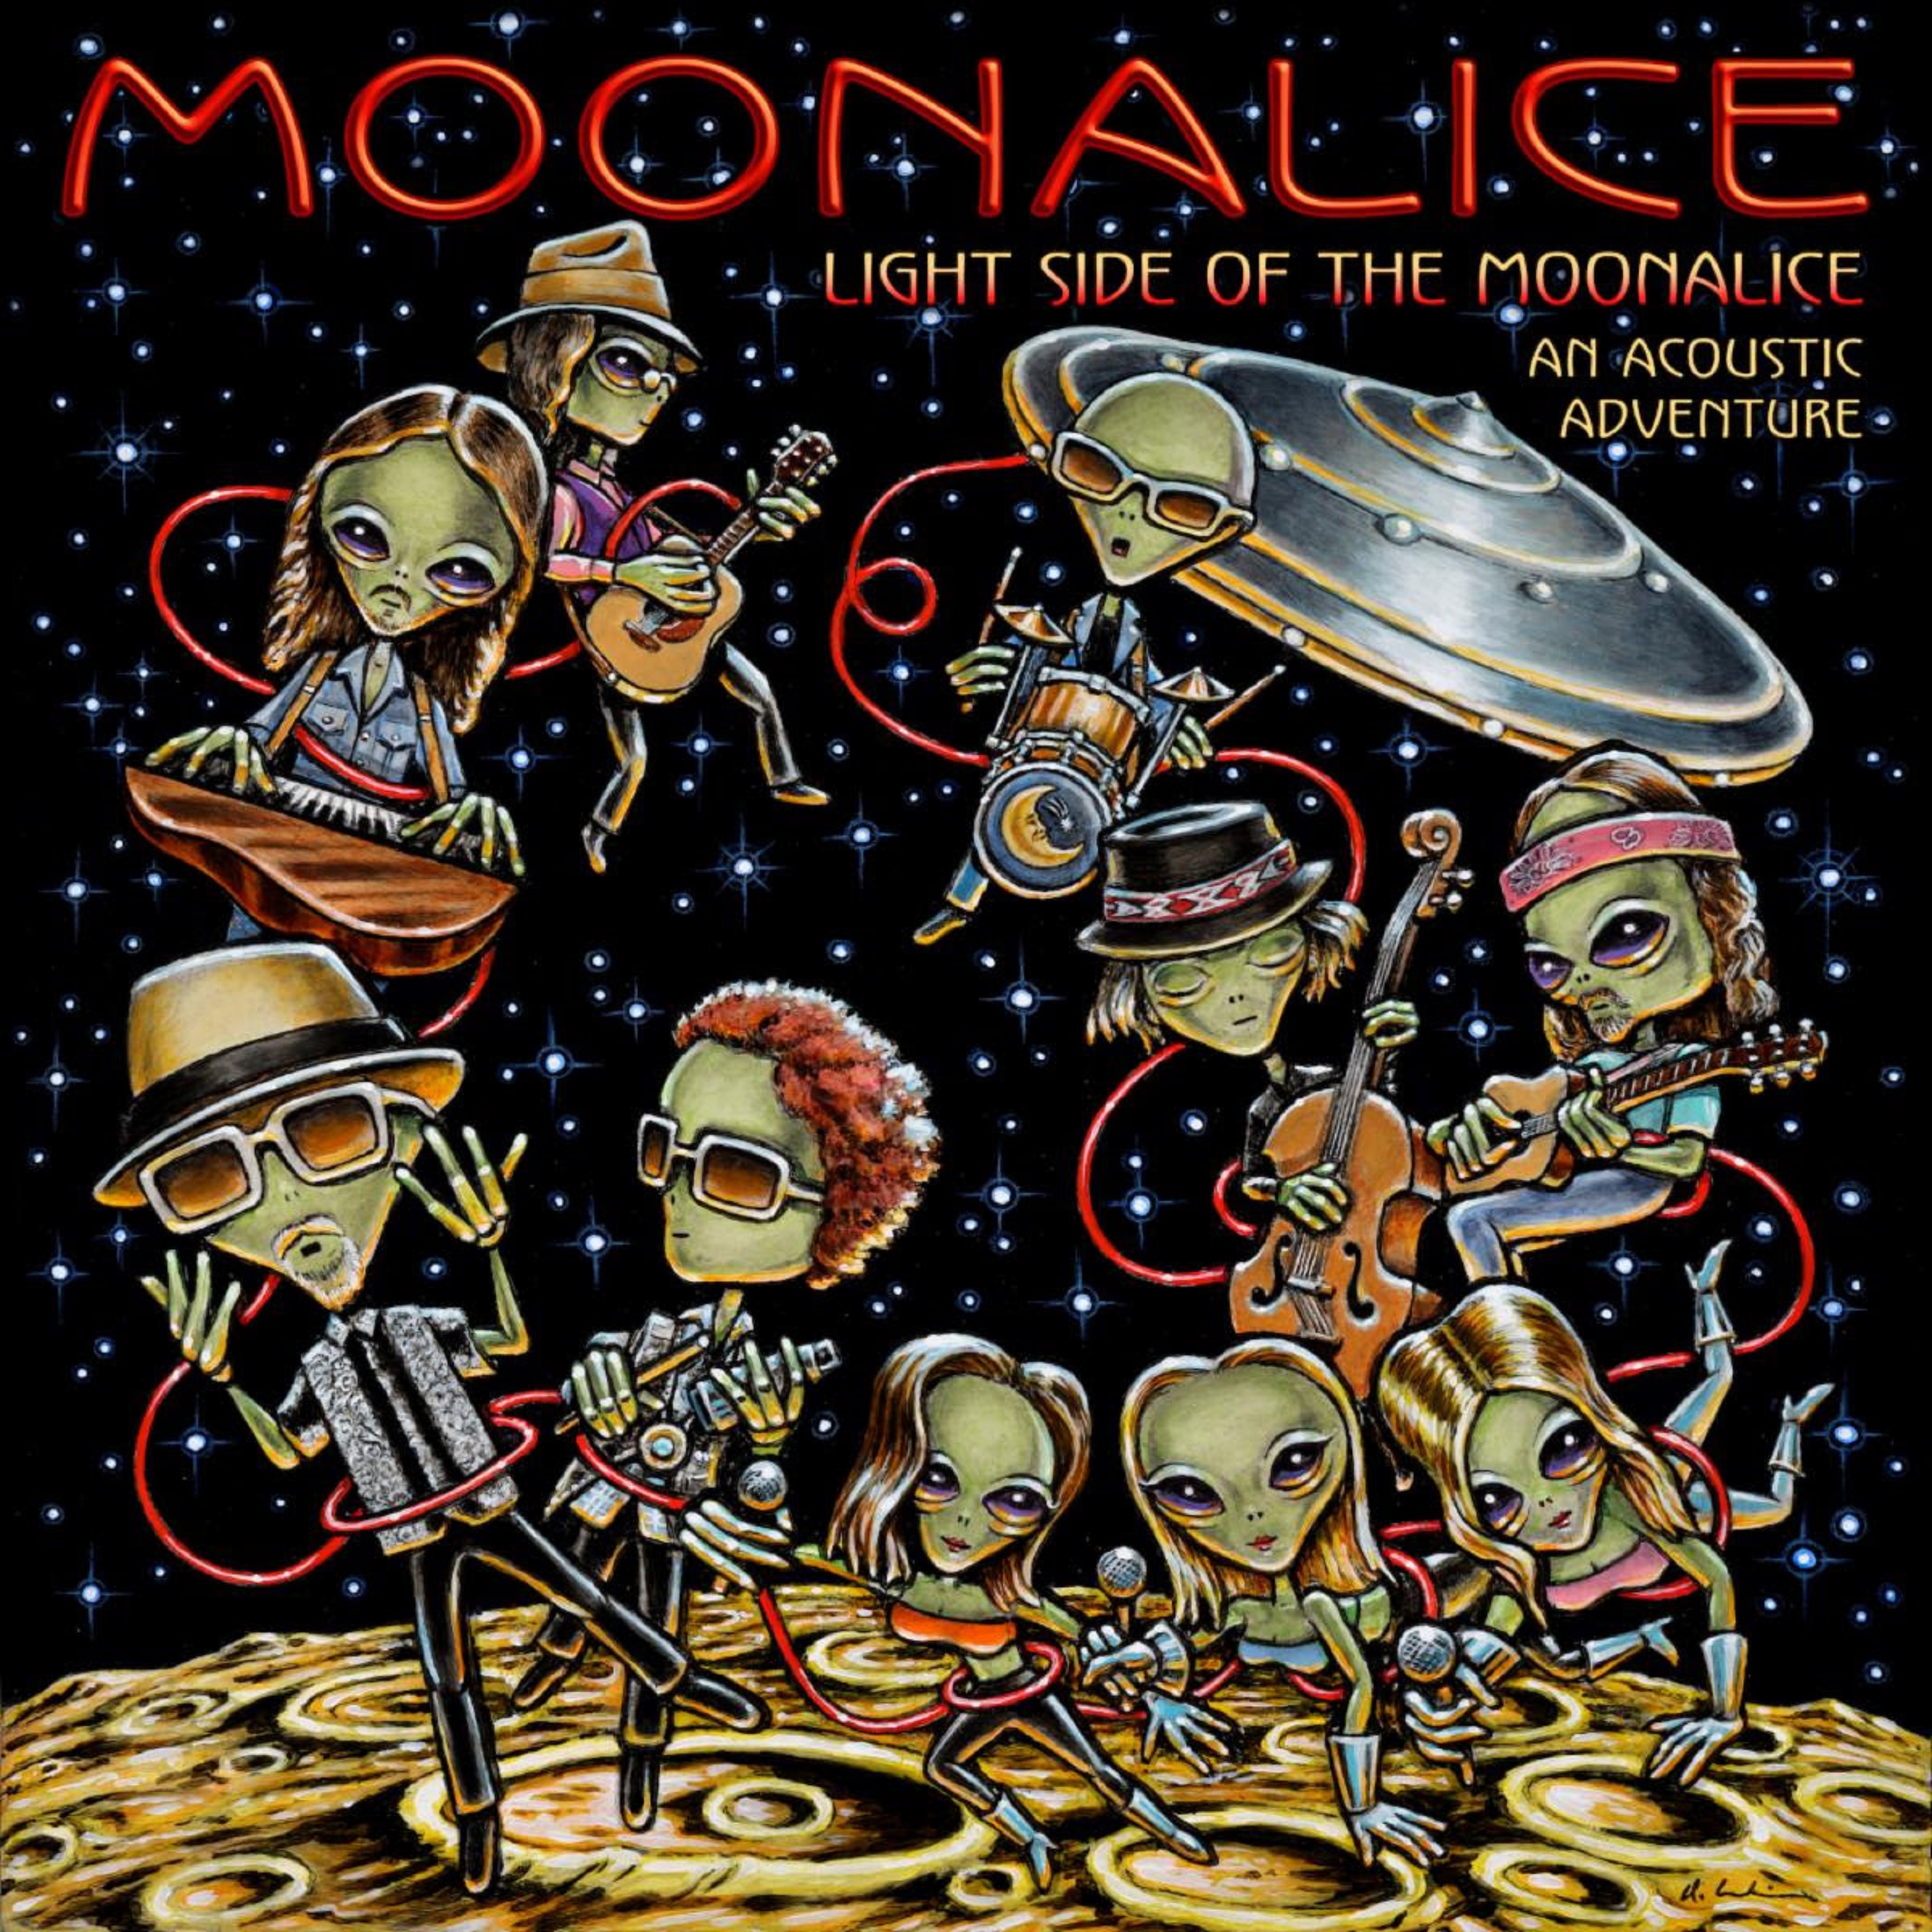 Moonalice Announces 'Light Side of the Moonalice - An Acoustic Adventure' w new single "Arms Reach Out"